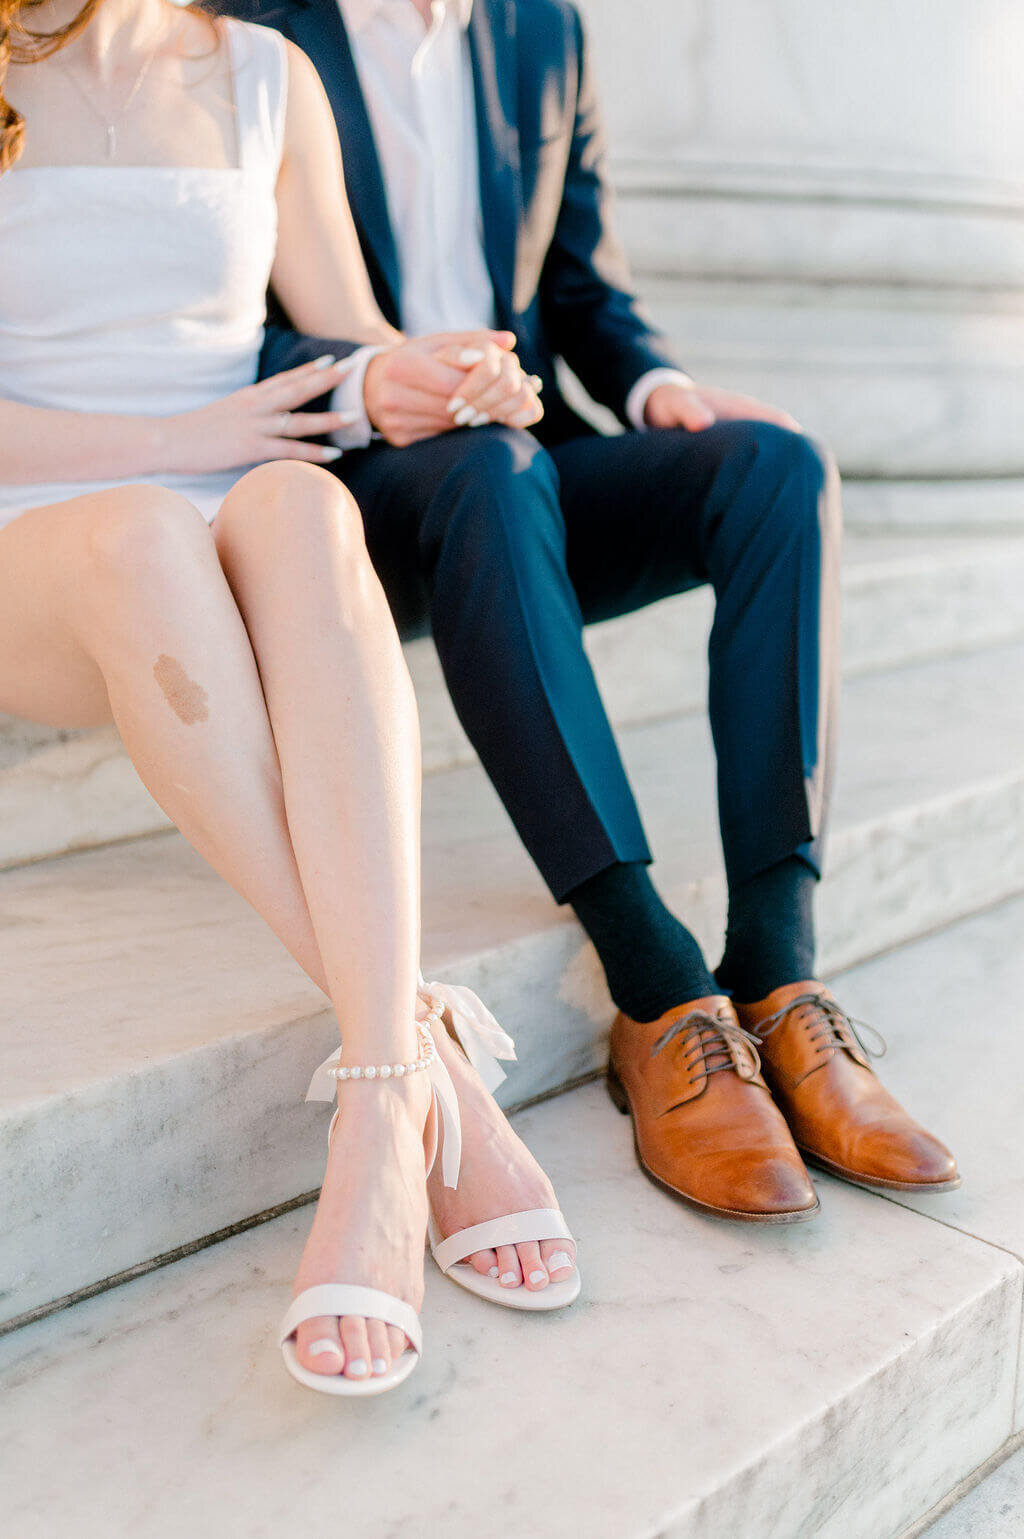 Detail shot of his and her shoes during an enagagement session captured by DC wedding photographer, Rachael Mattio.